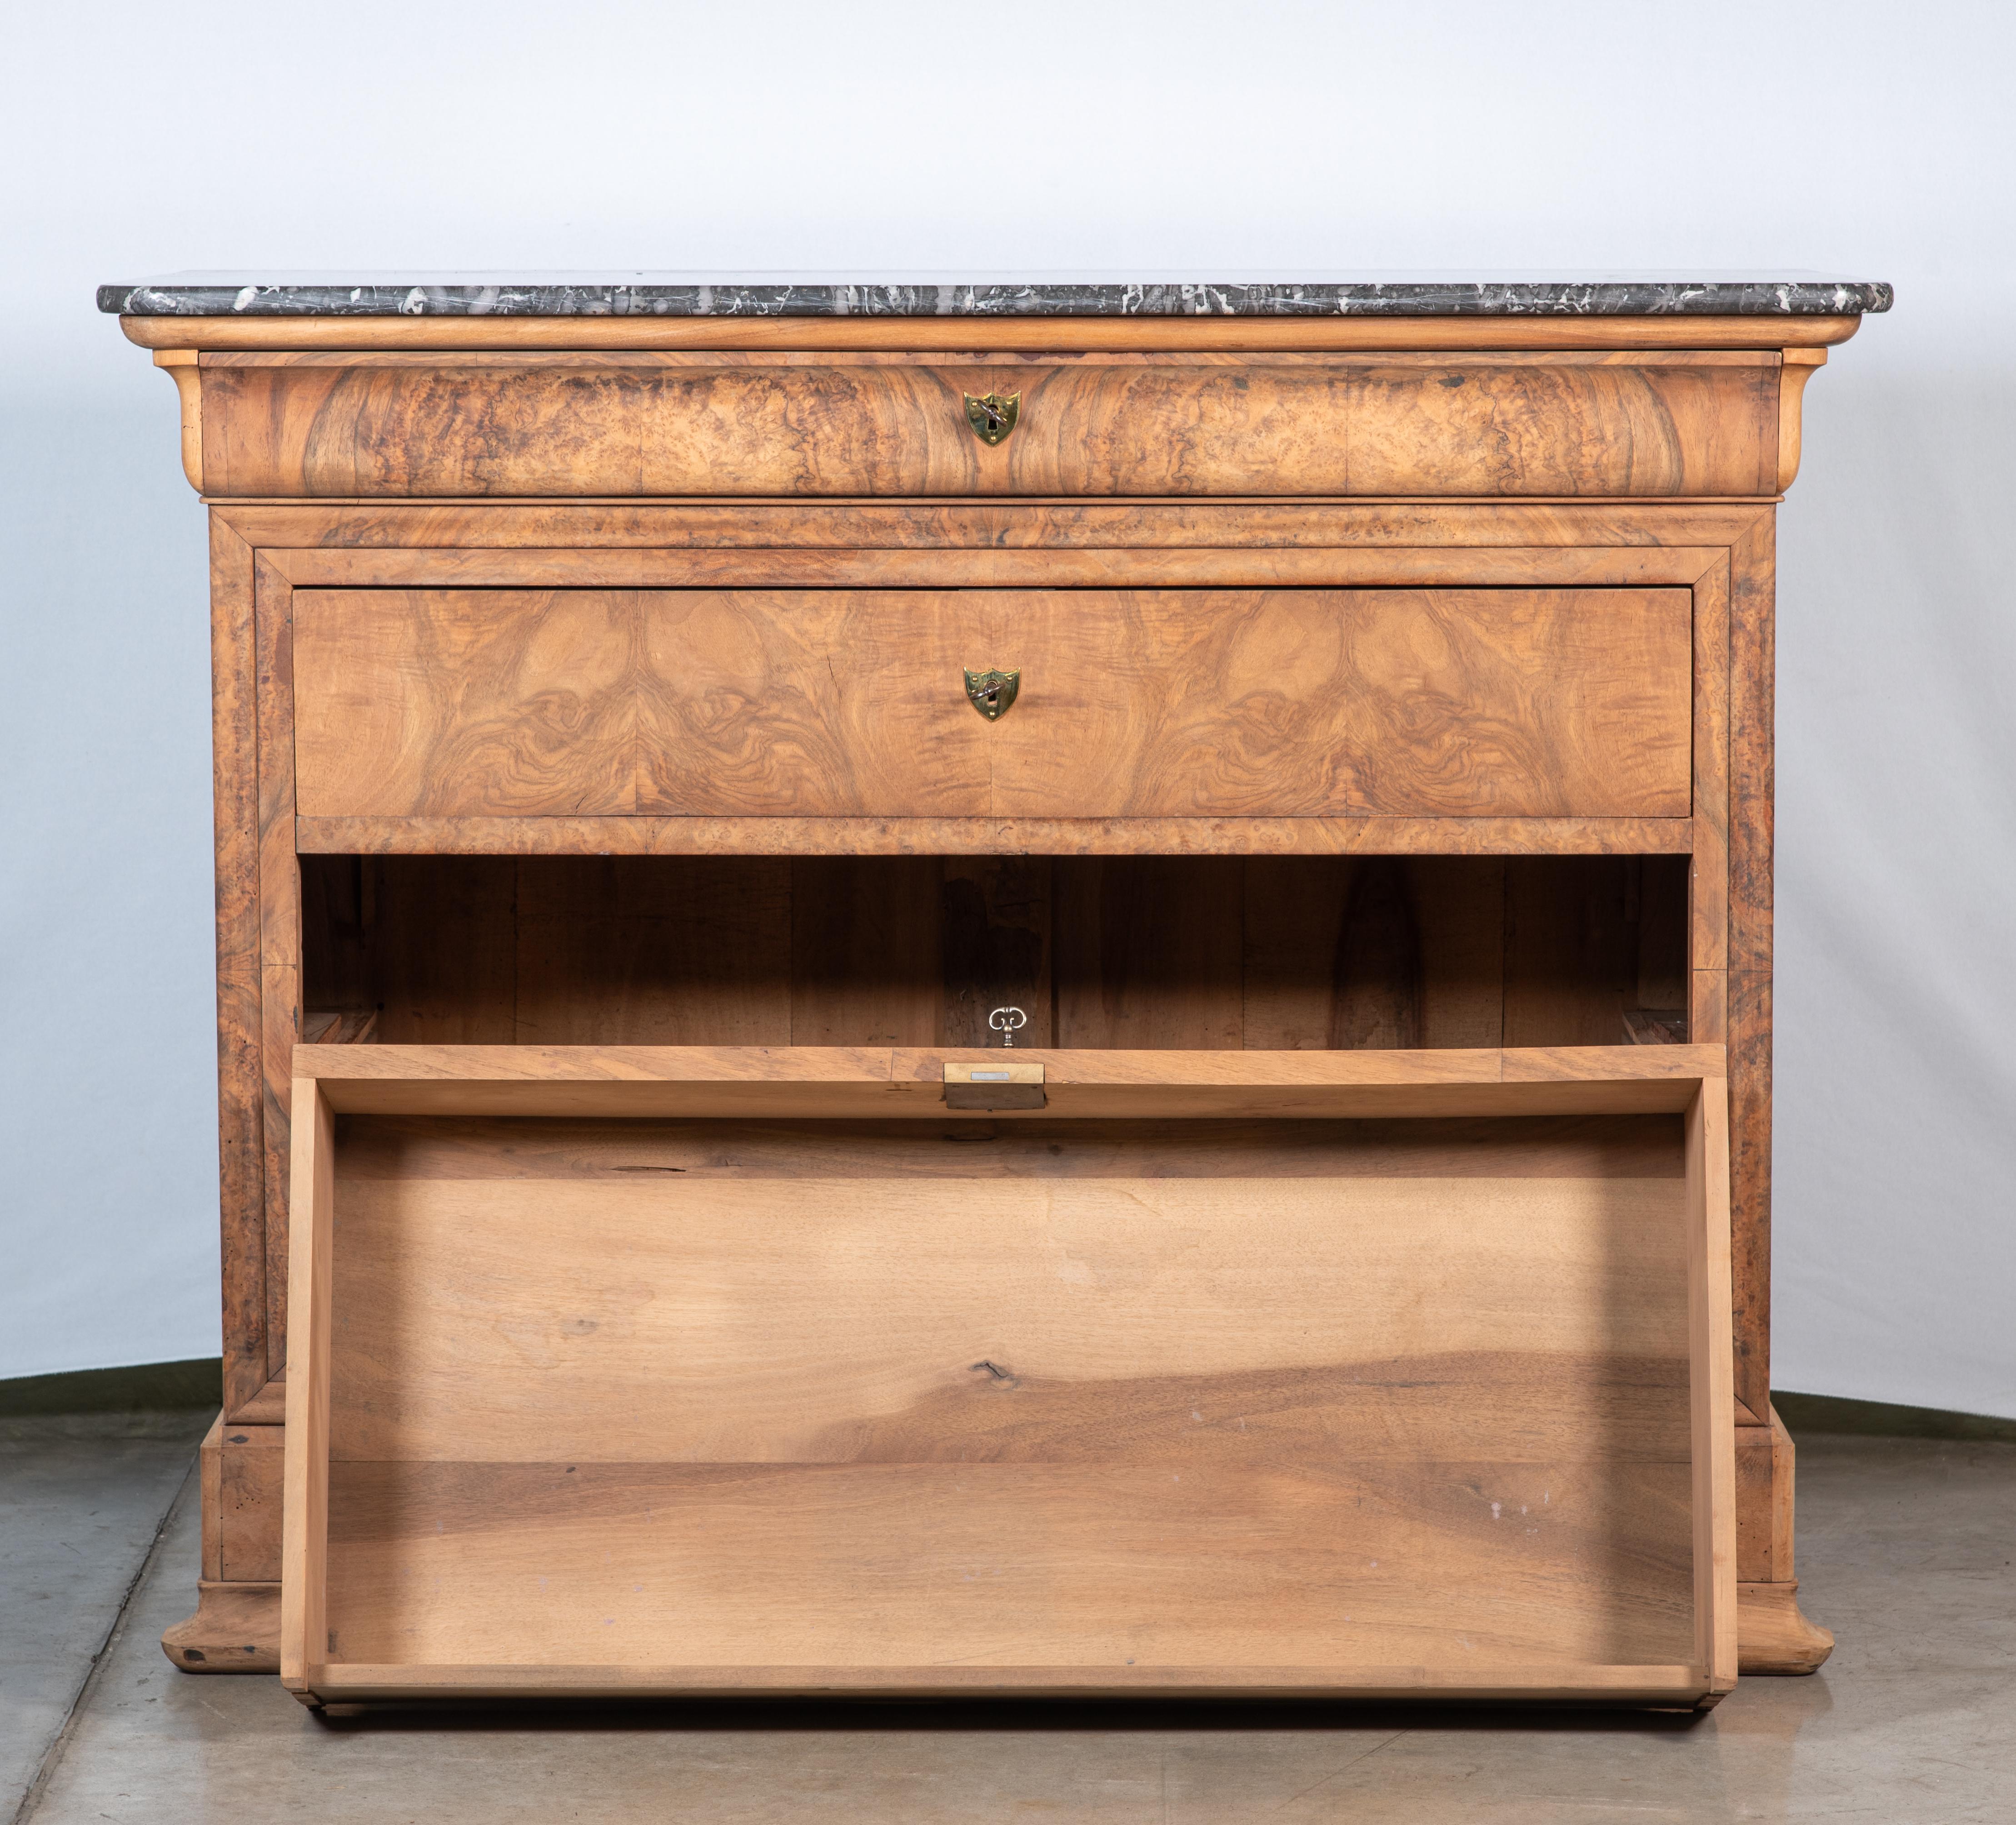 Immerse yourself in the timeless elegance of the Louis Philippe era with our exquisite 19th Century French Louis Philippe Burl Walnut Veneer Commode. Crafted to perfection, this stunning piece encapsulates the refined aesthetics and meticulous